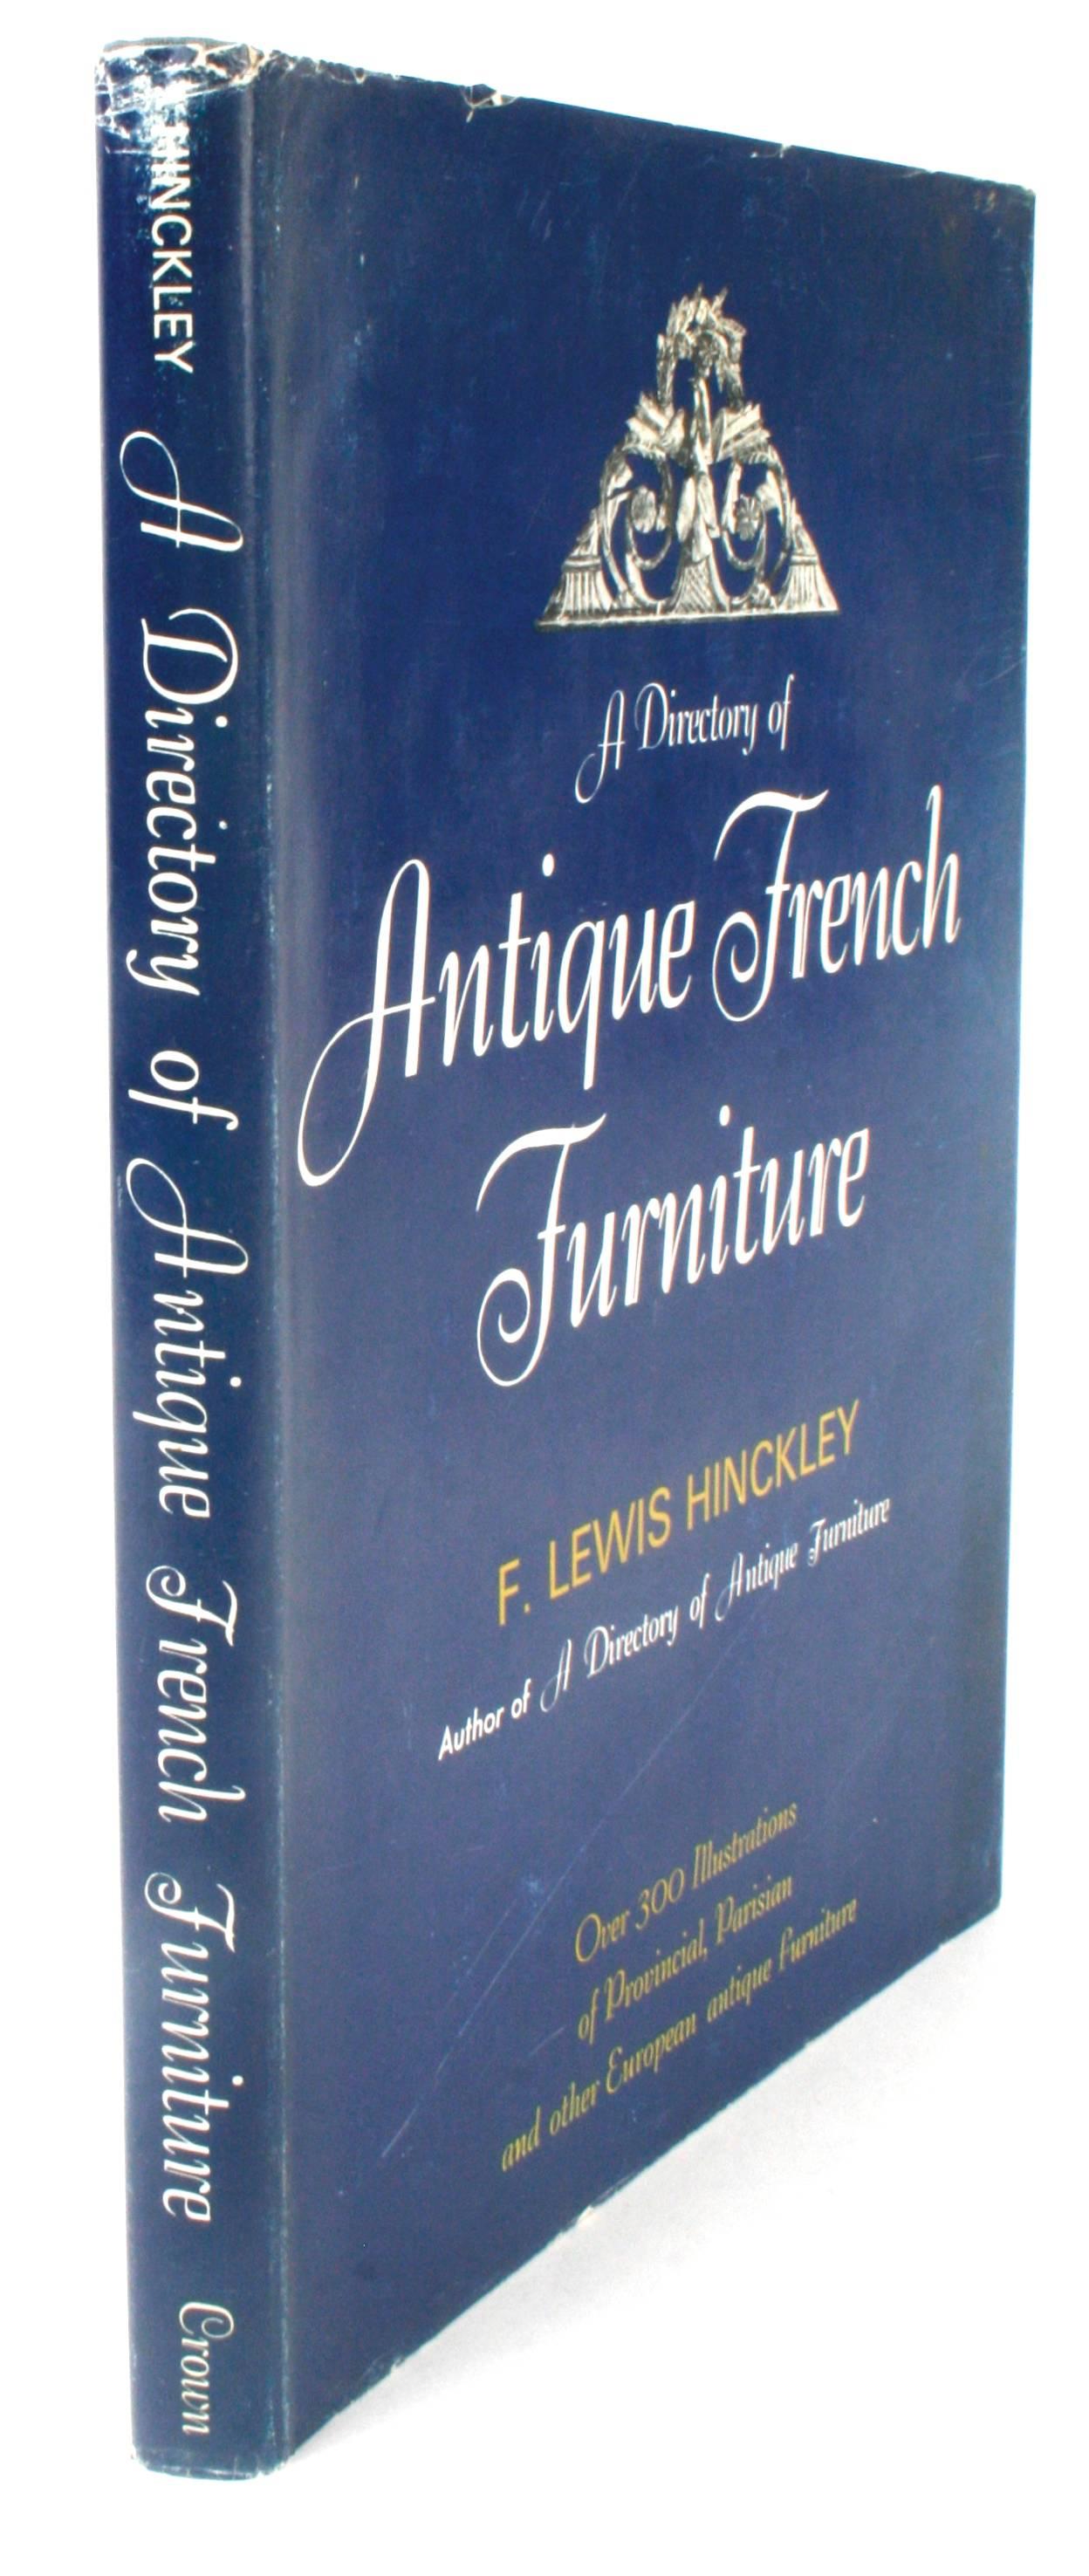 Antique French Furniture by F. Lewis Hinckley, First Edition 6